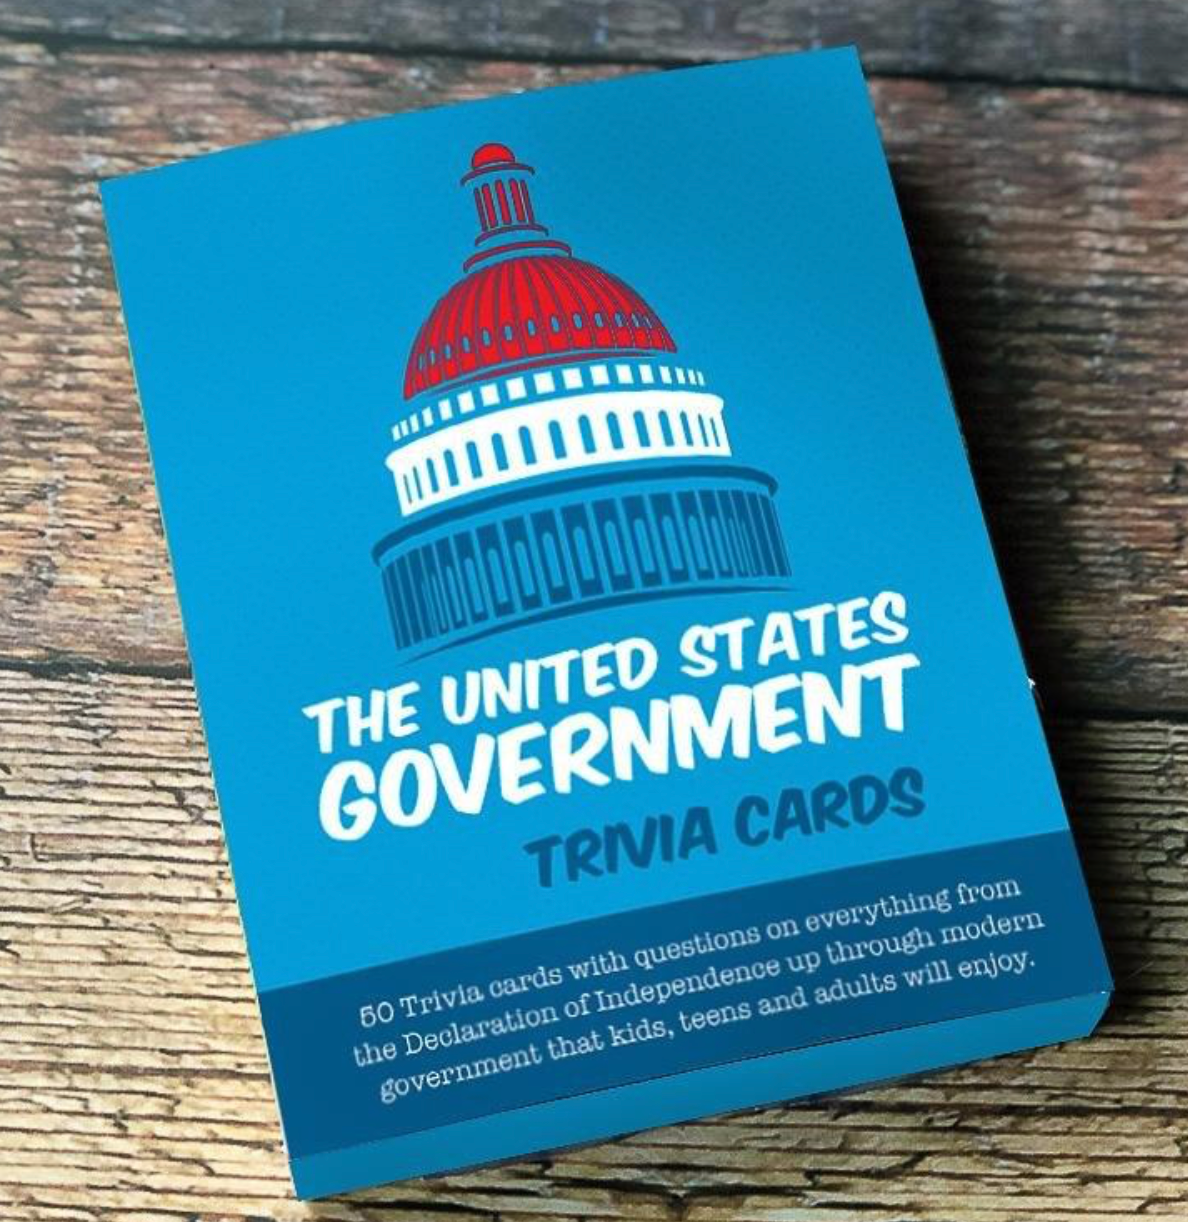 The US Government Trivia Cards